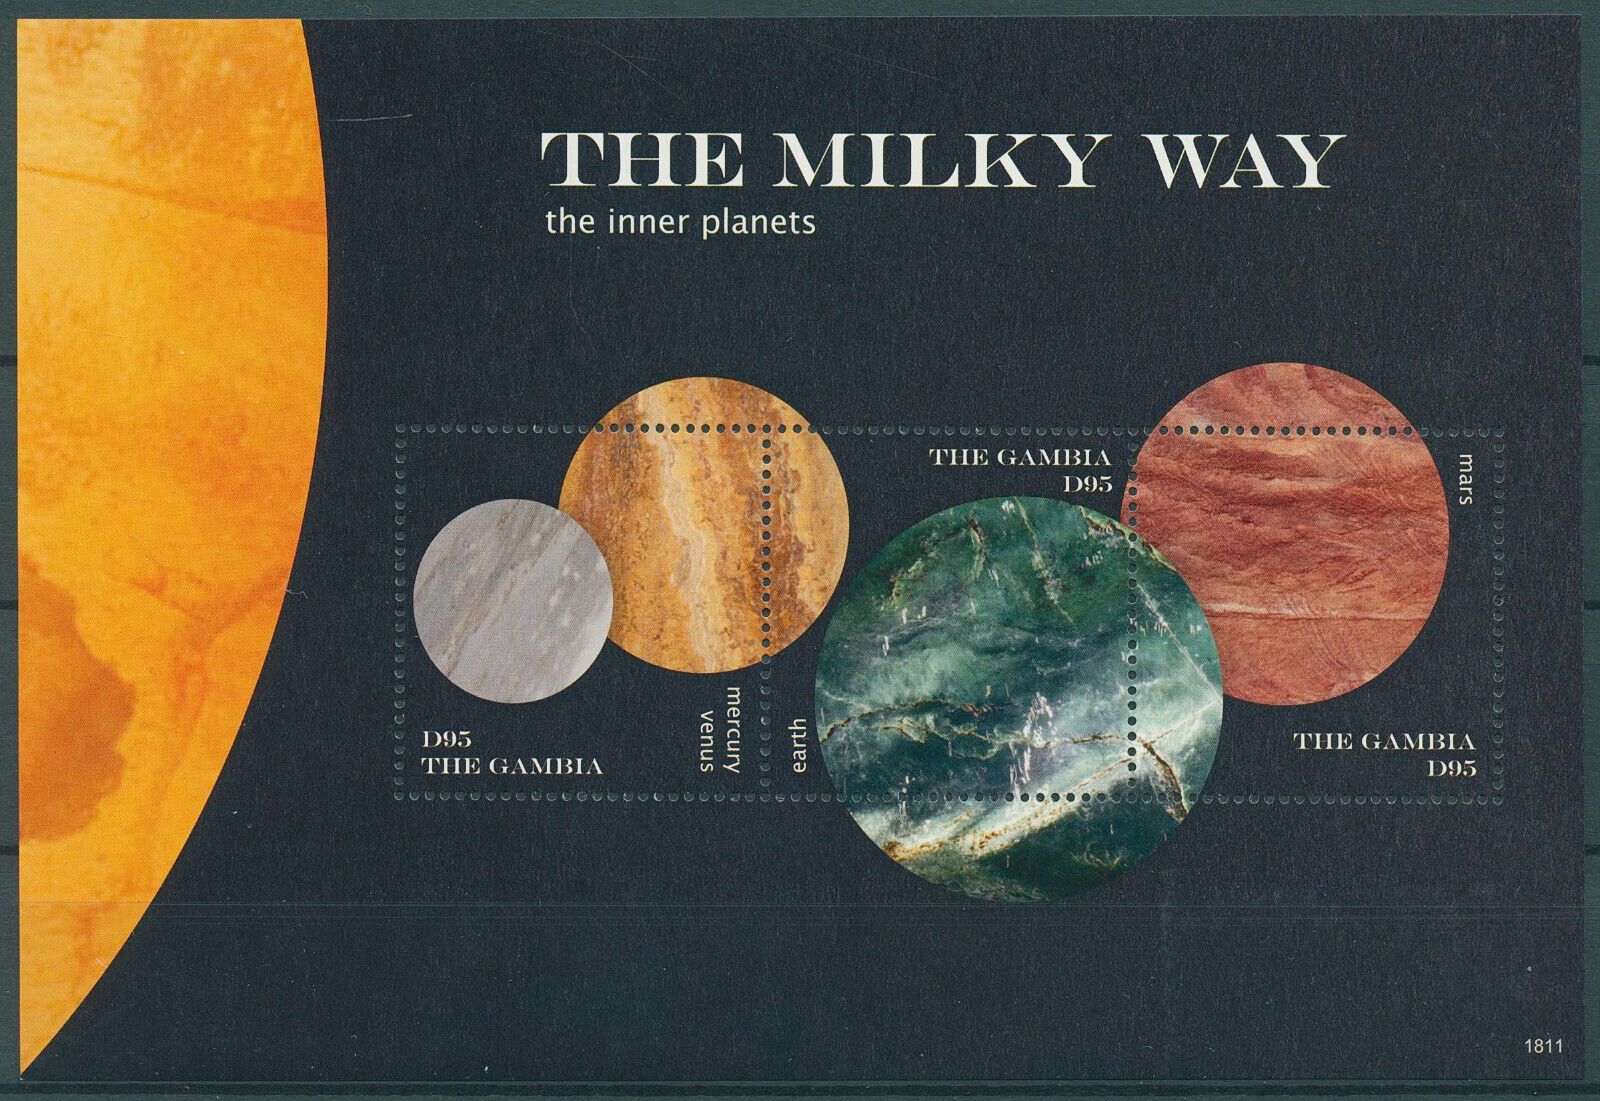 Gambia 2018 MNH Space Stamps Milky Way Inner Planets Solar System 3v M/S I